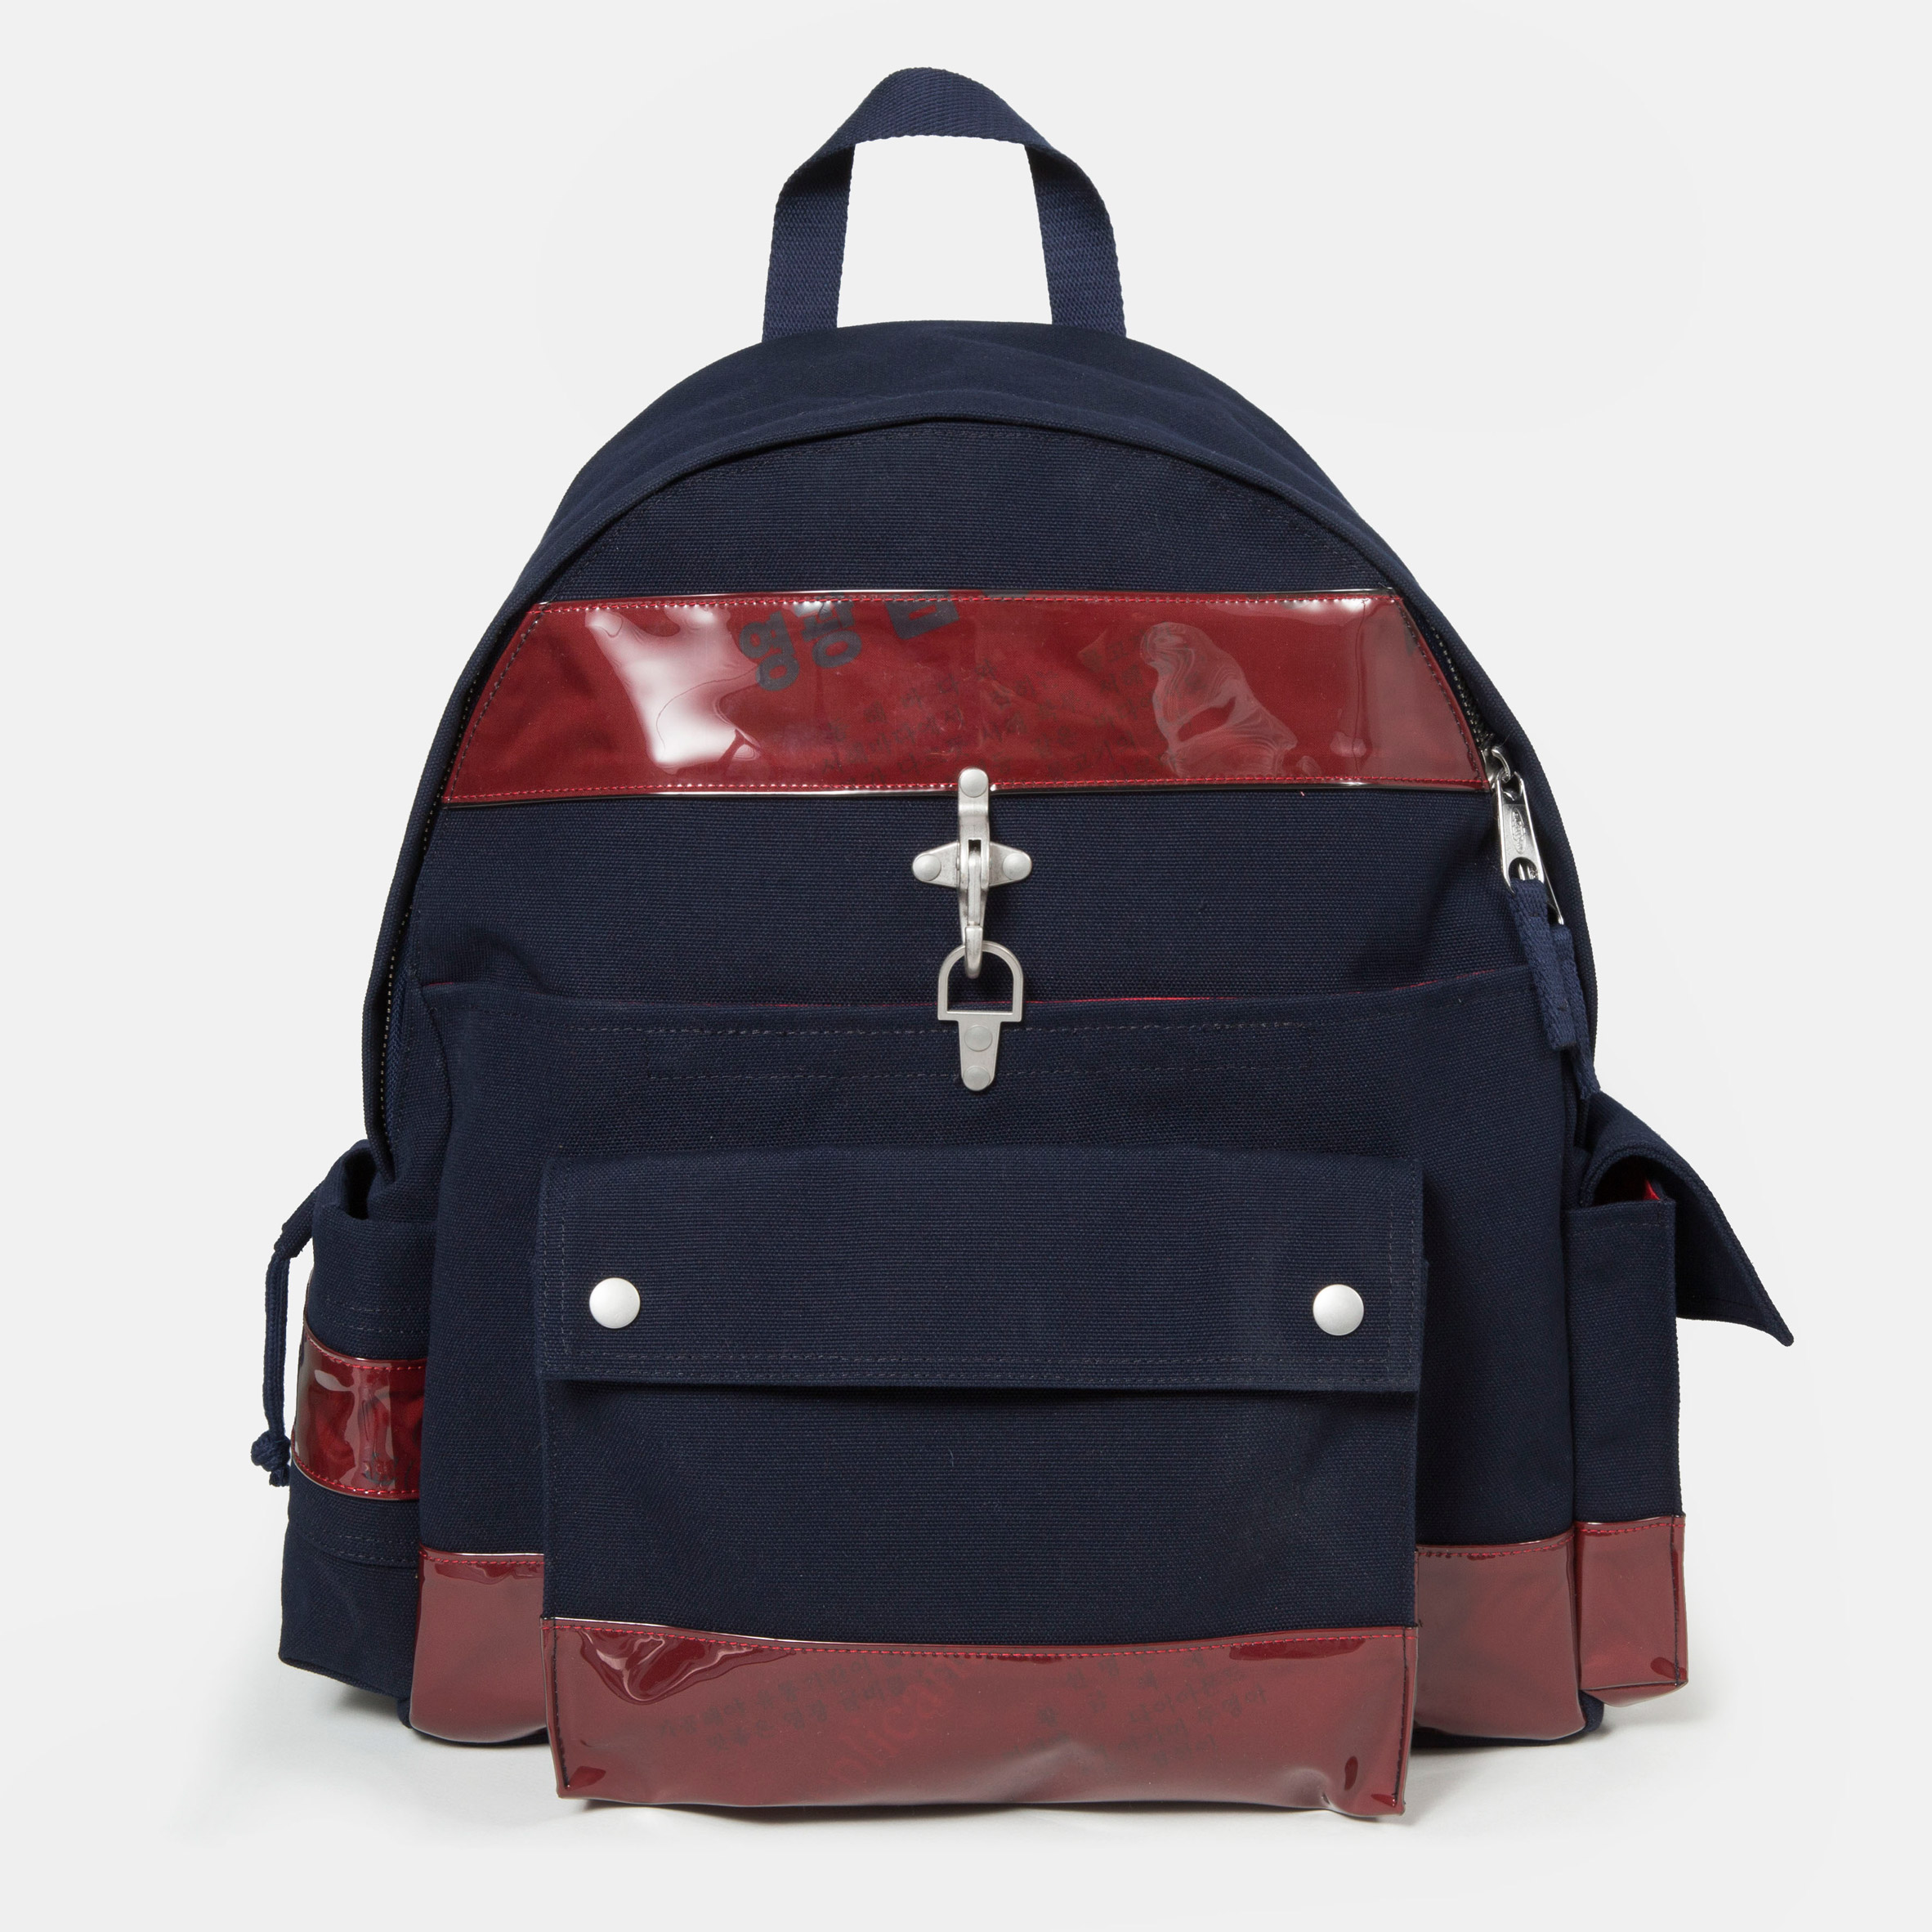 Style Ascent  Raf Simons for Eastpak